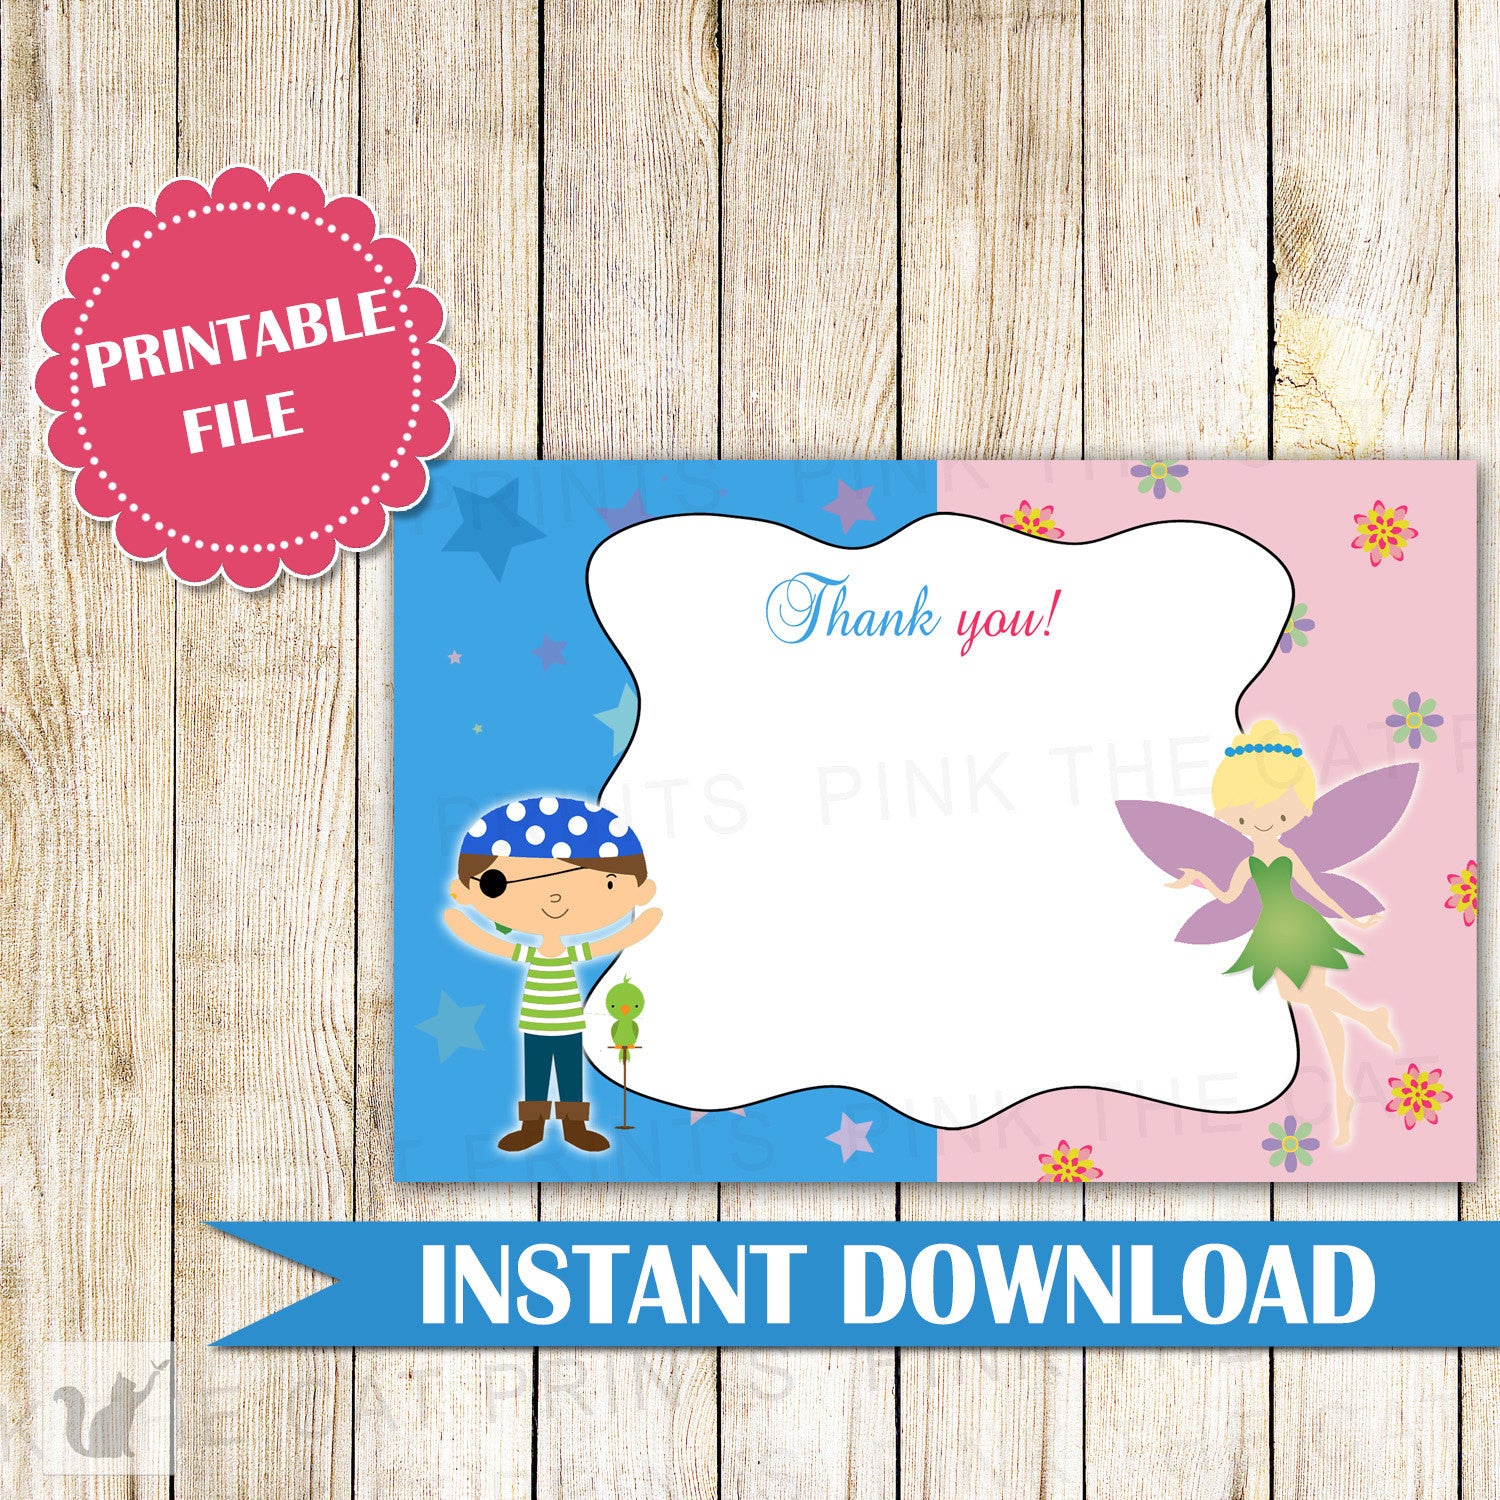 Pirate Fairy Thank You Cards - Pirate Fairy Birthday Party Kids Birthday Fairy Girl Boy Joint Party Siblings Brother Sister INSTANT DOWNLOAD